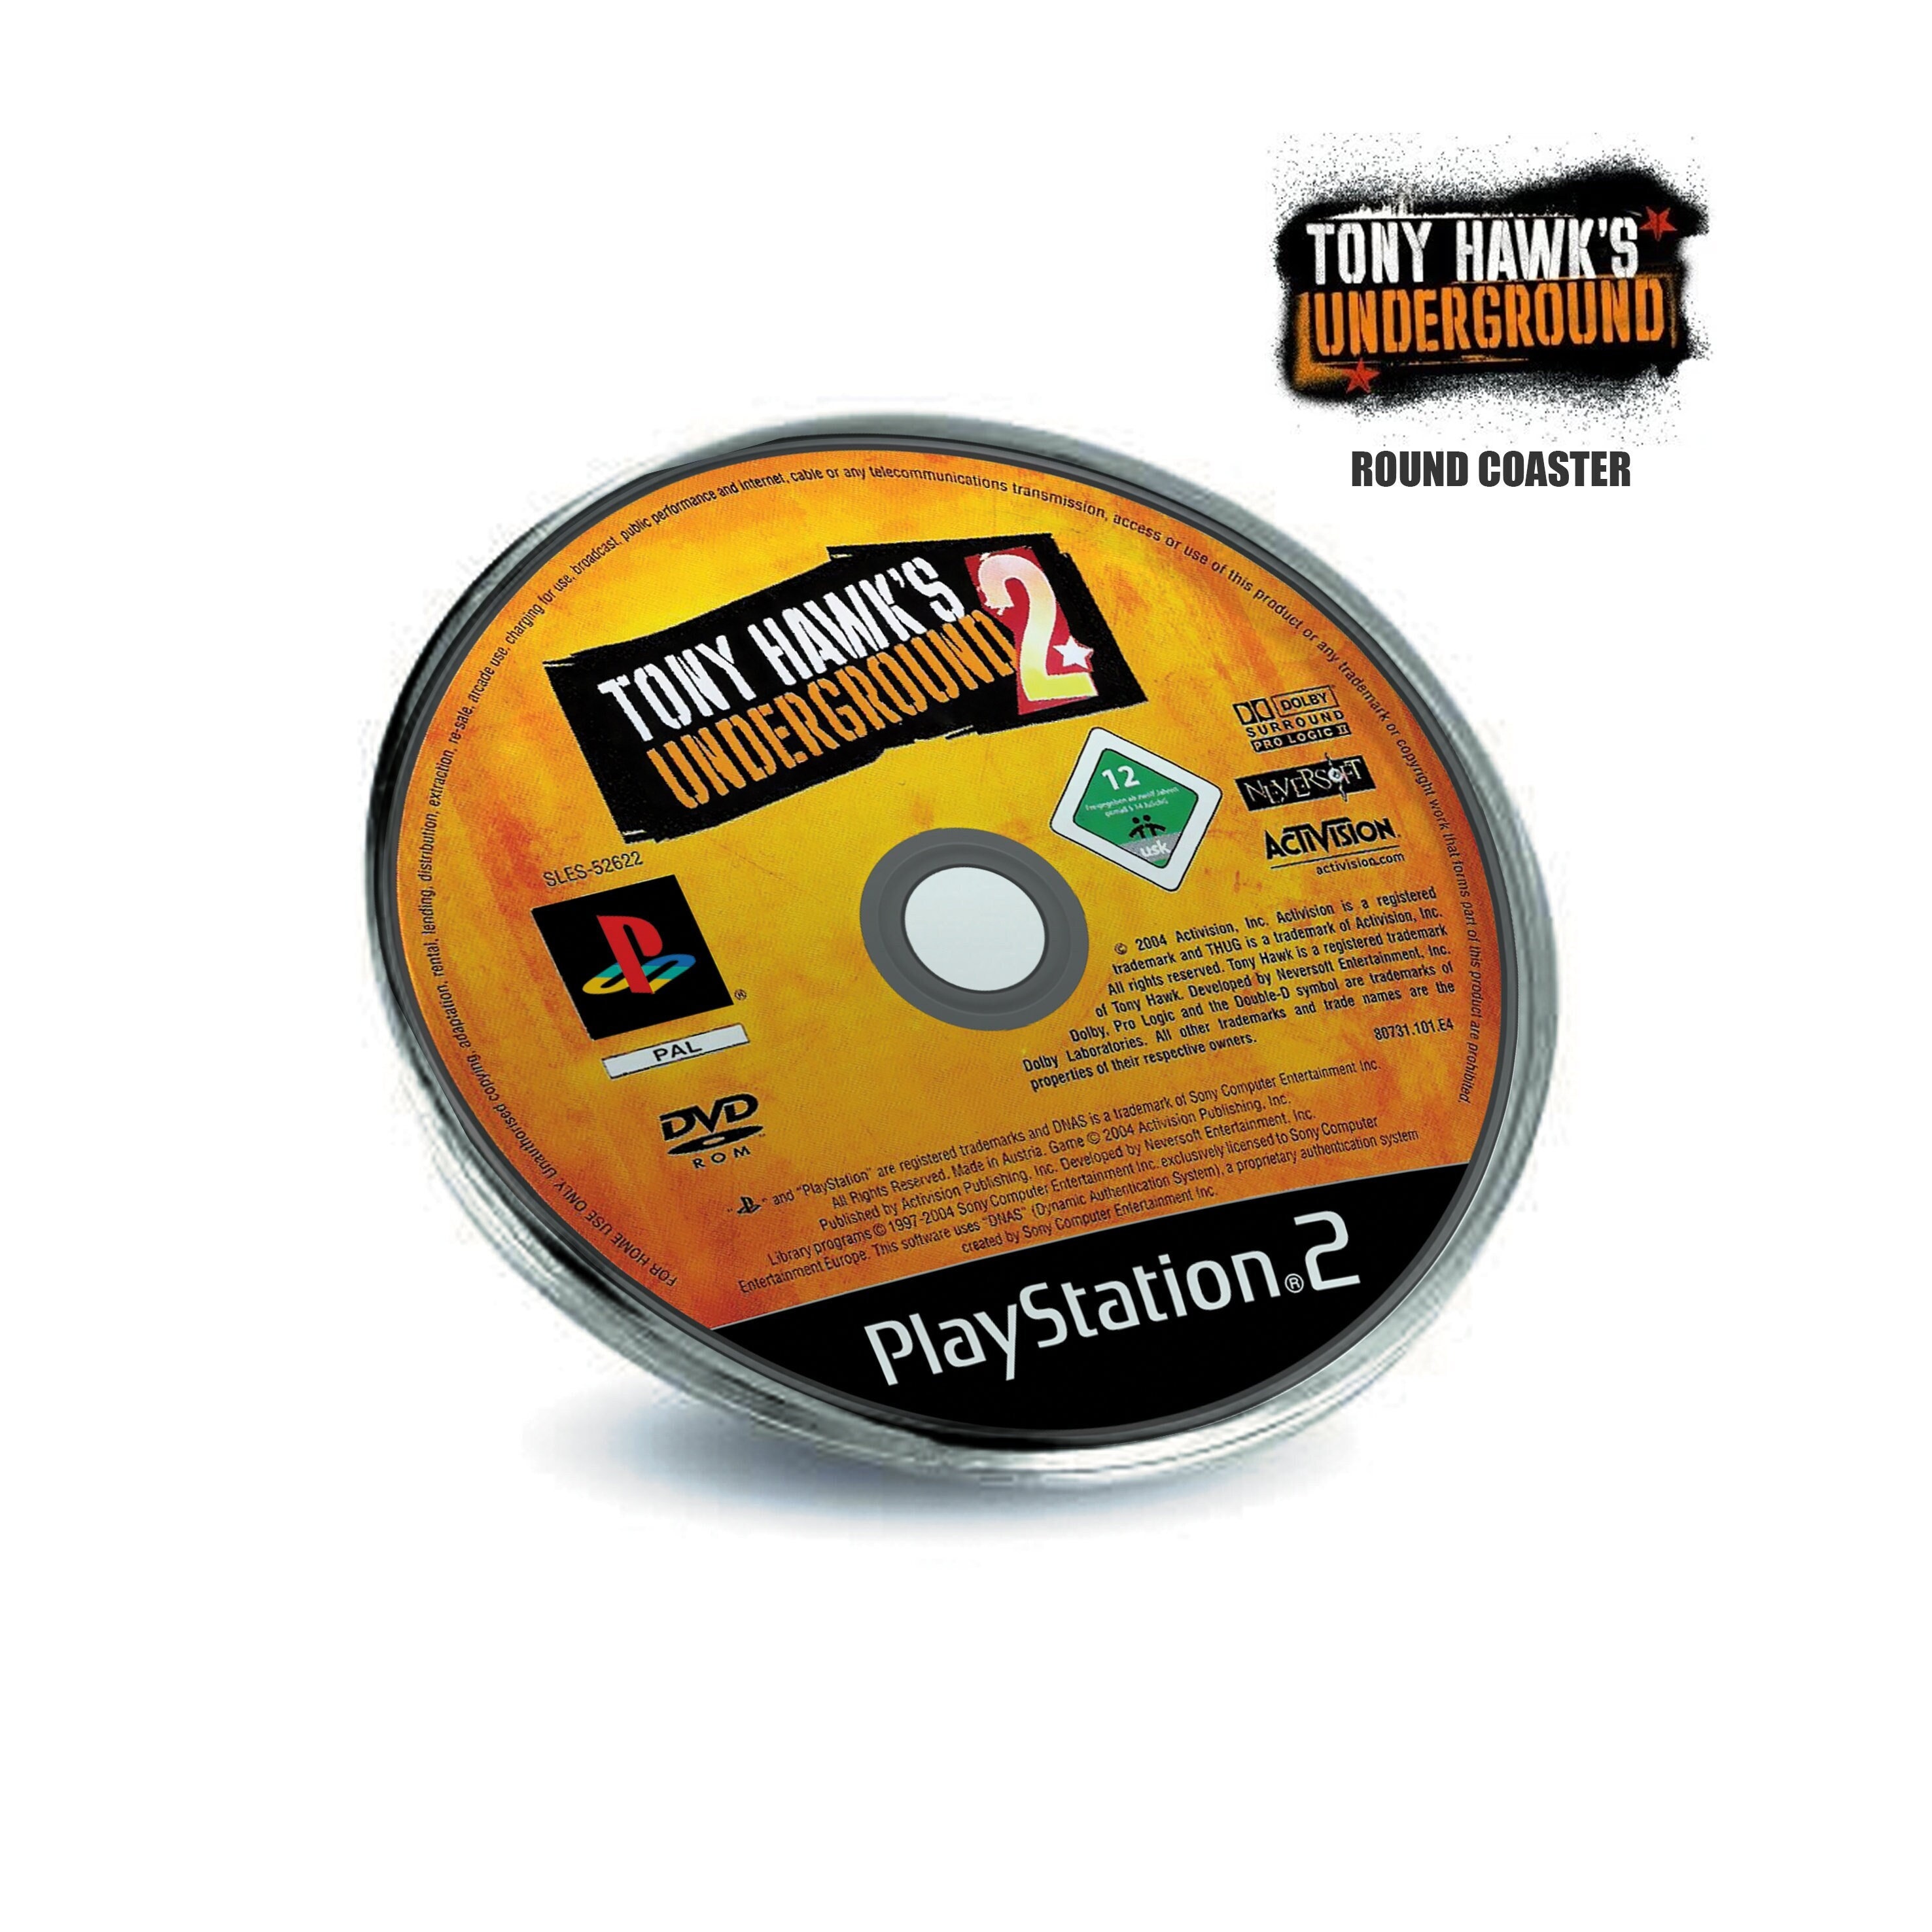 Tony Hawk's Underground (PlayStation 2 PS2) - DISC ONLY